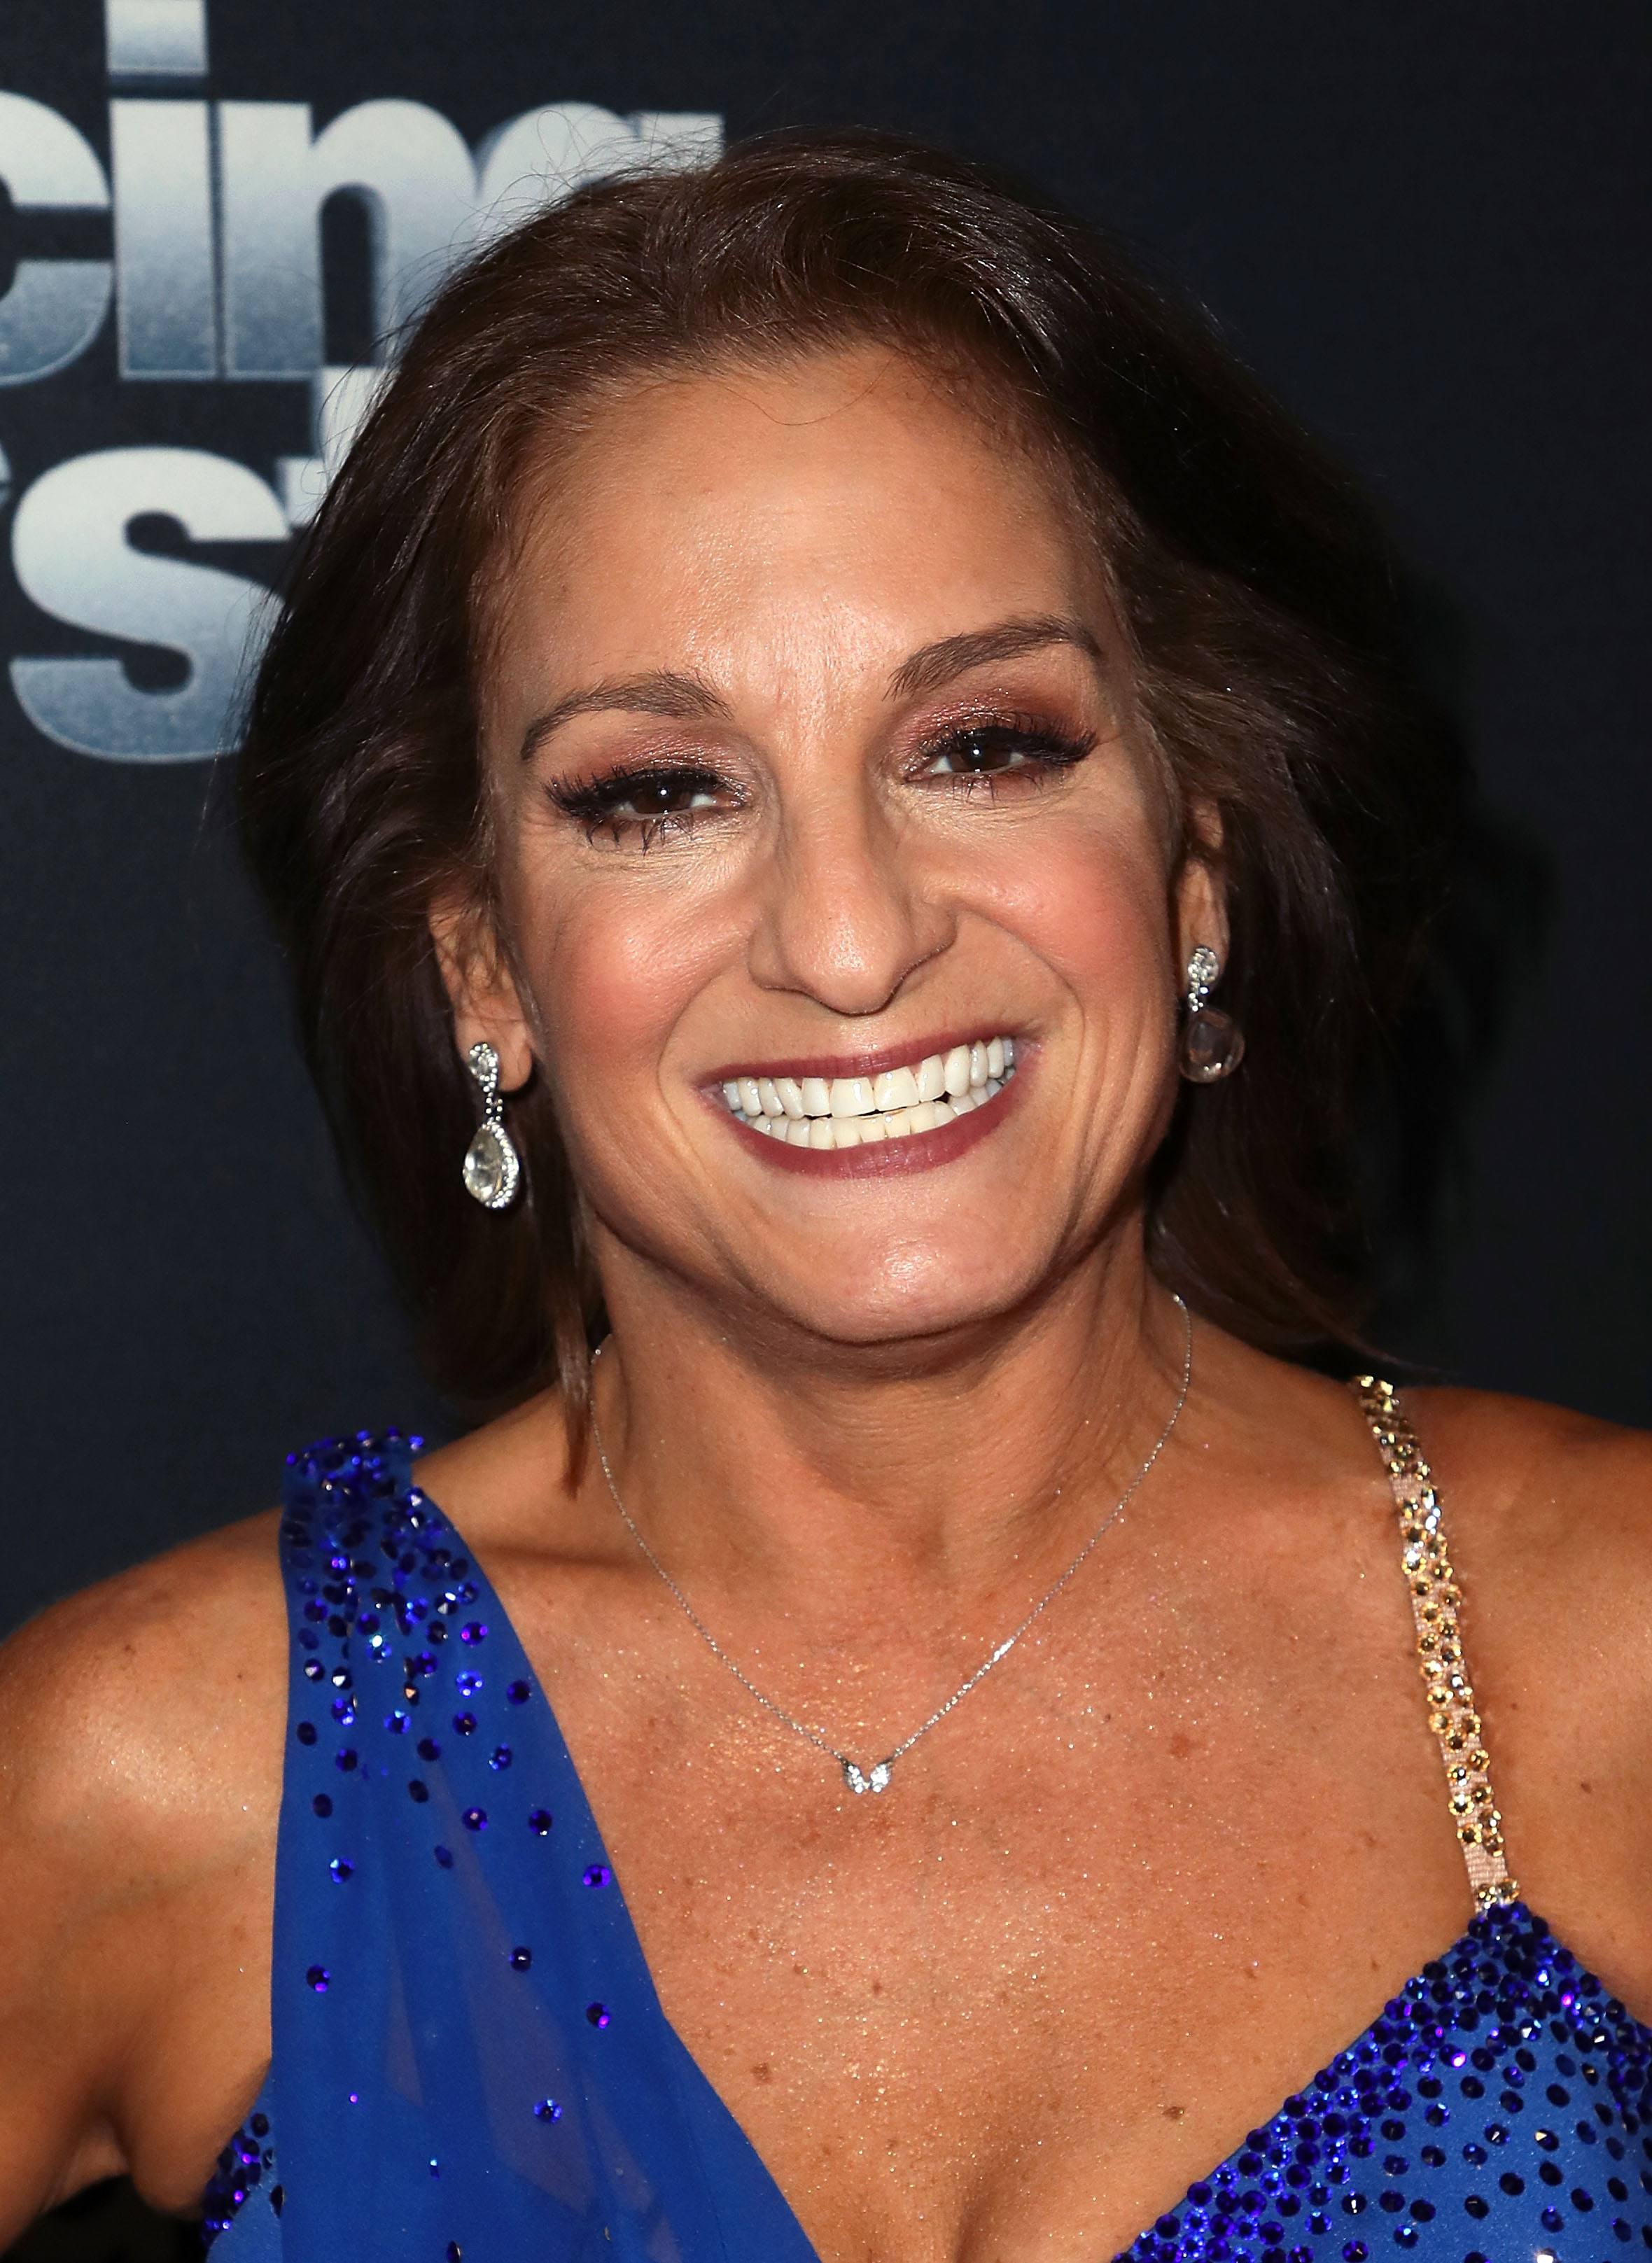 Mary Lou Retton on Season 27 of "Dancing With The Stars" on October 8, 2018 | Source: Getty Images